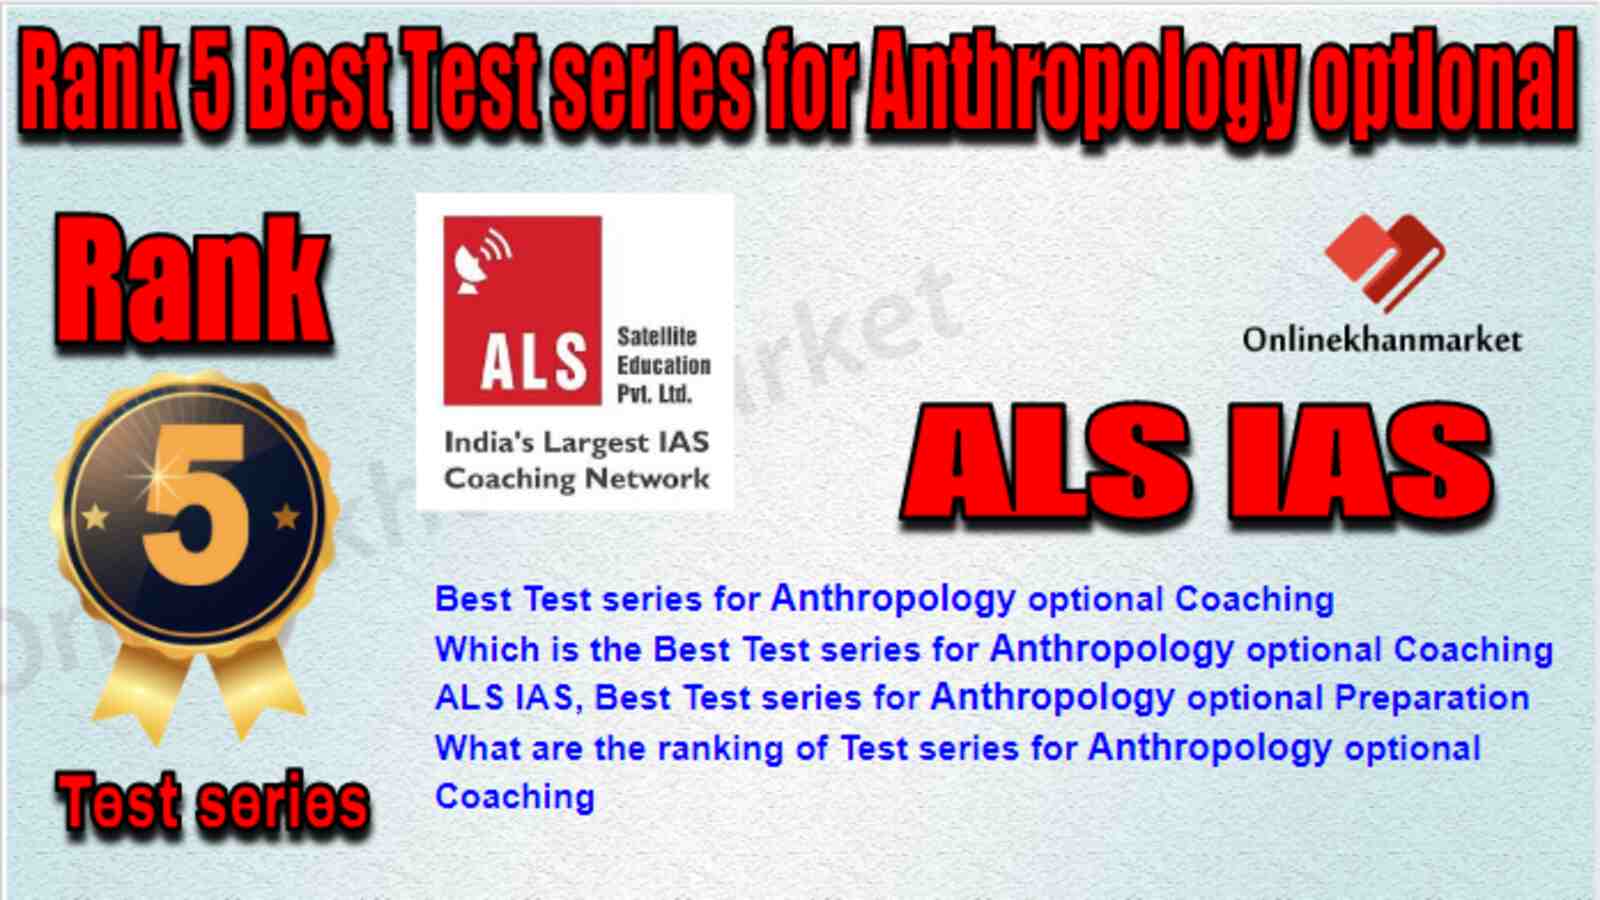 Rank 5 Best Test series for Anthropology optional